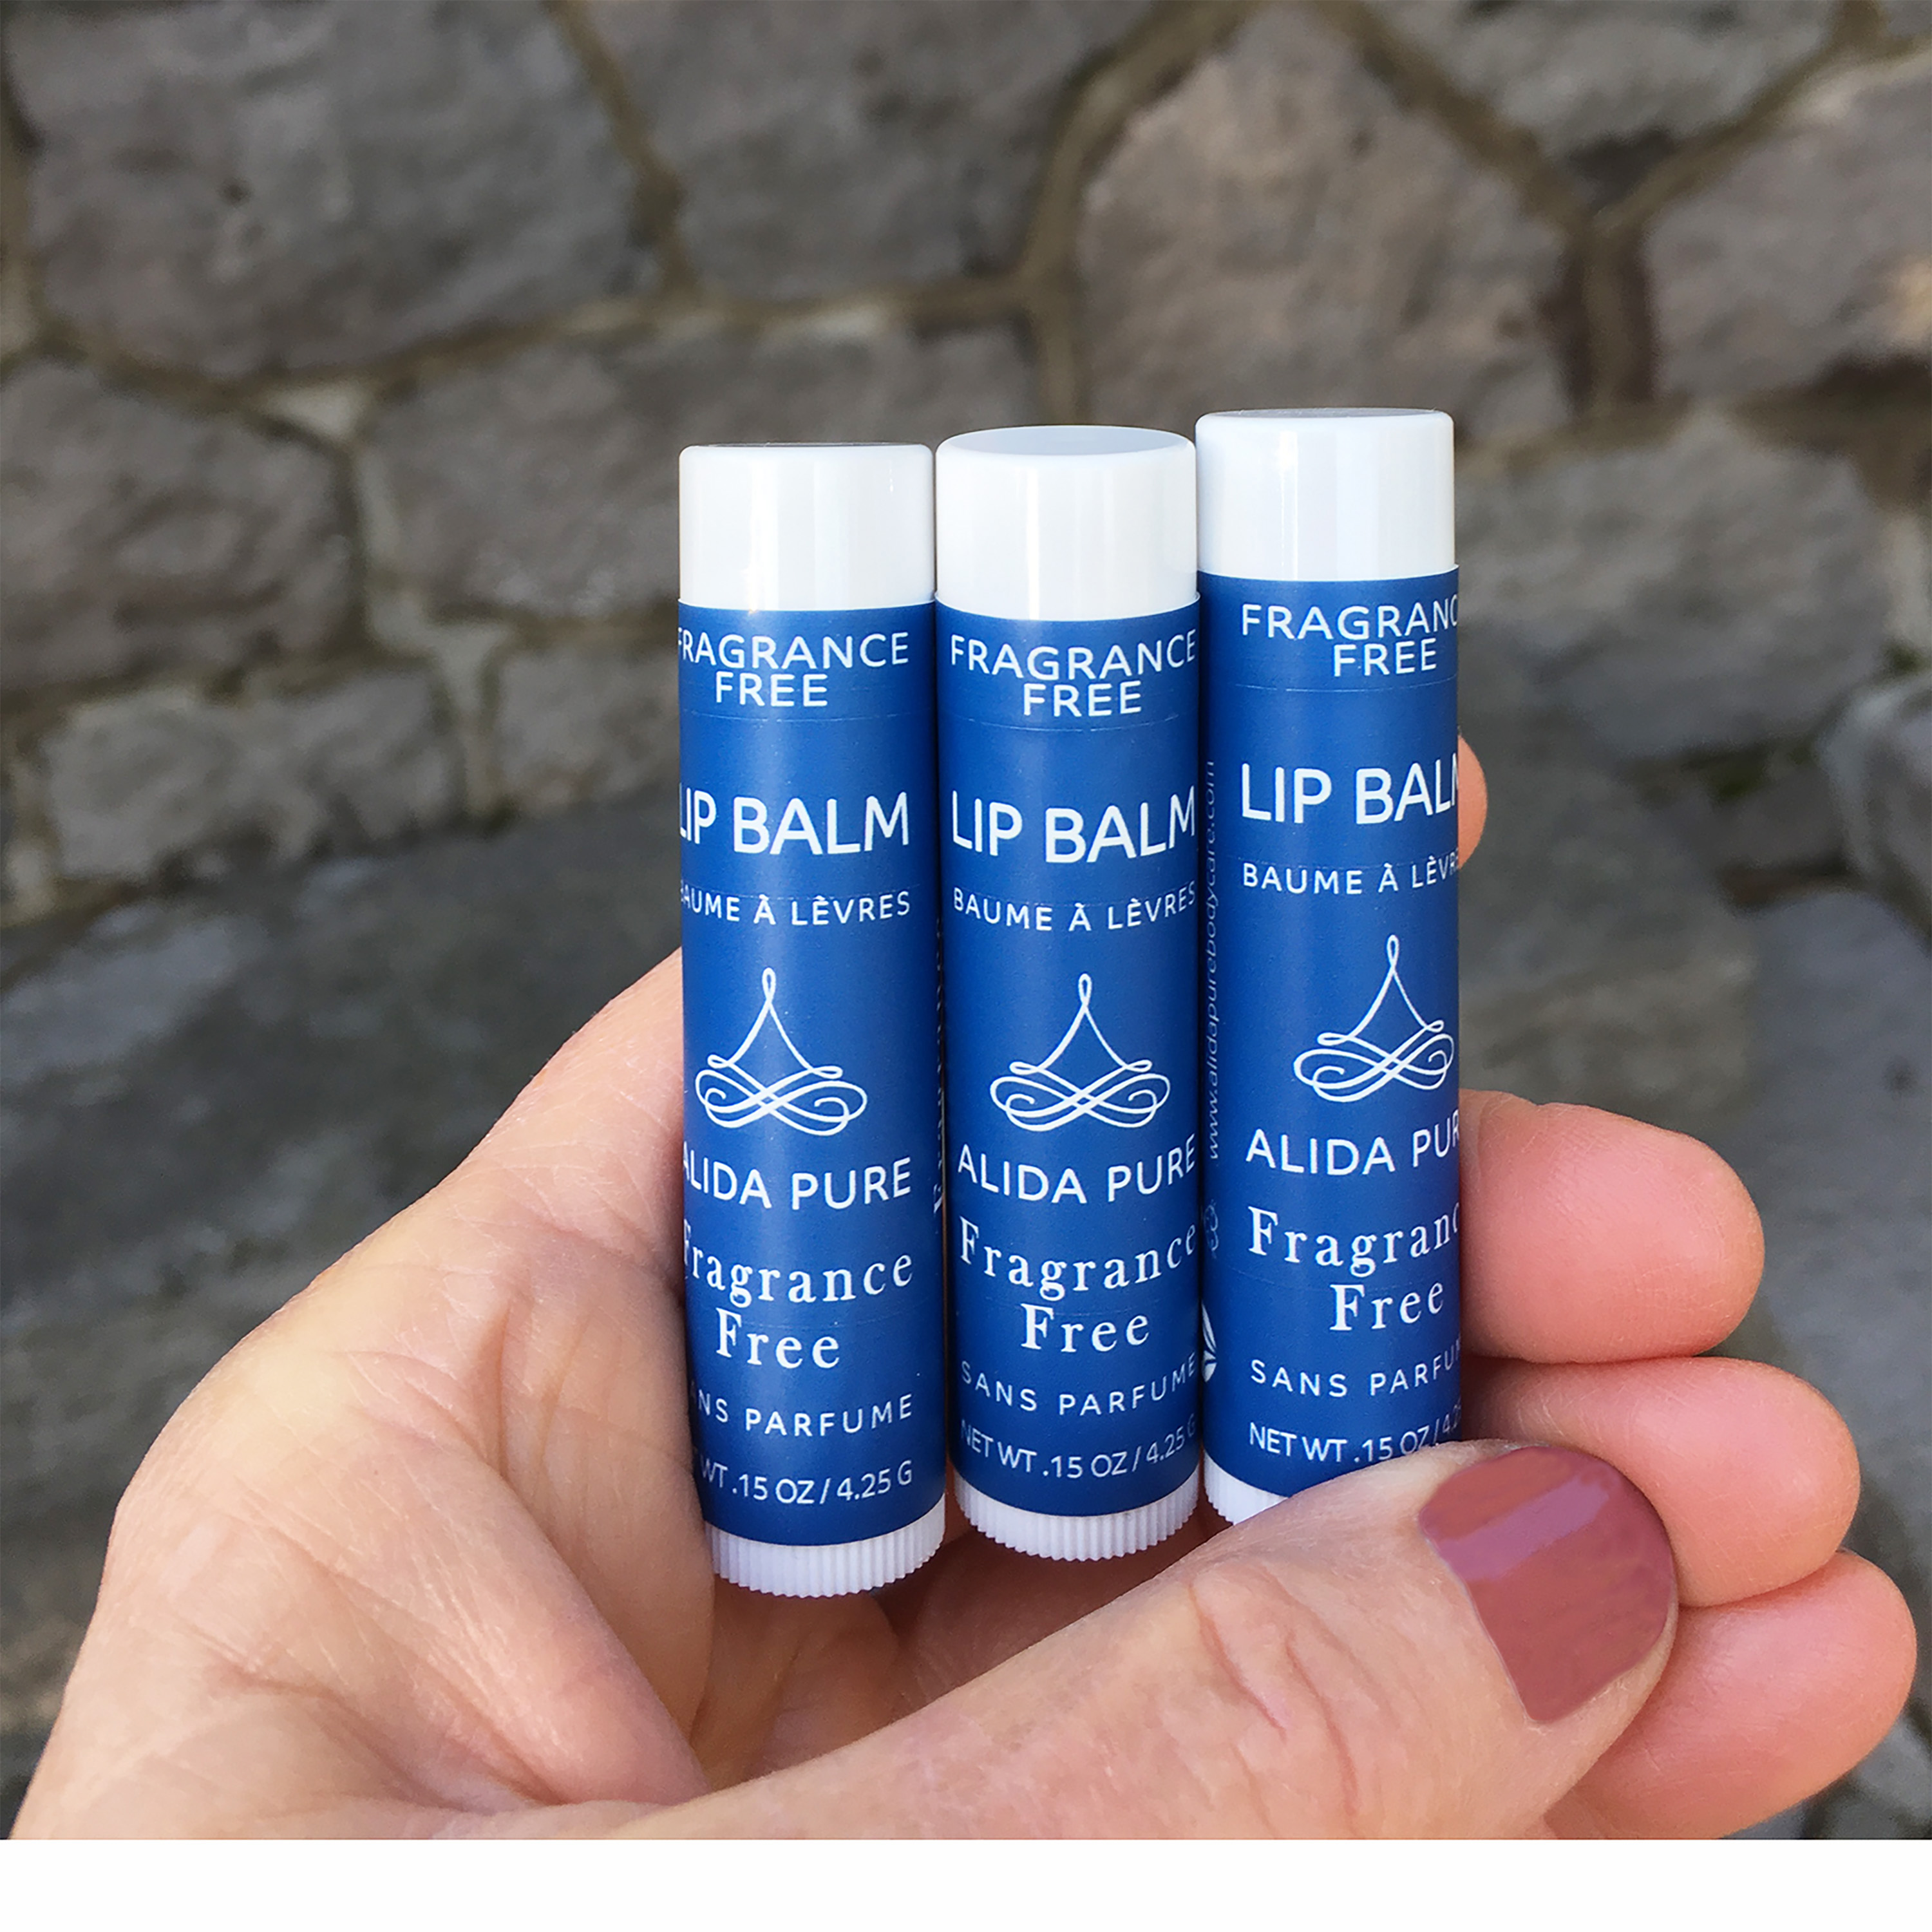 ALIDA PURE Fragrance Free Lip Balm Collection. Unscented, Fragrance Free, Beeswax Free, Vegan Lip Balm